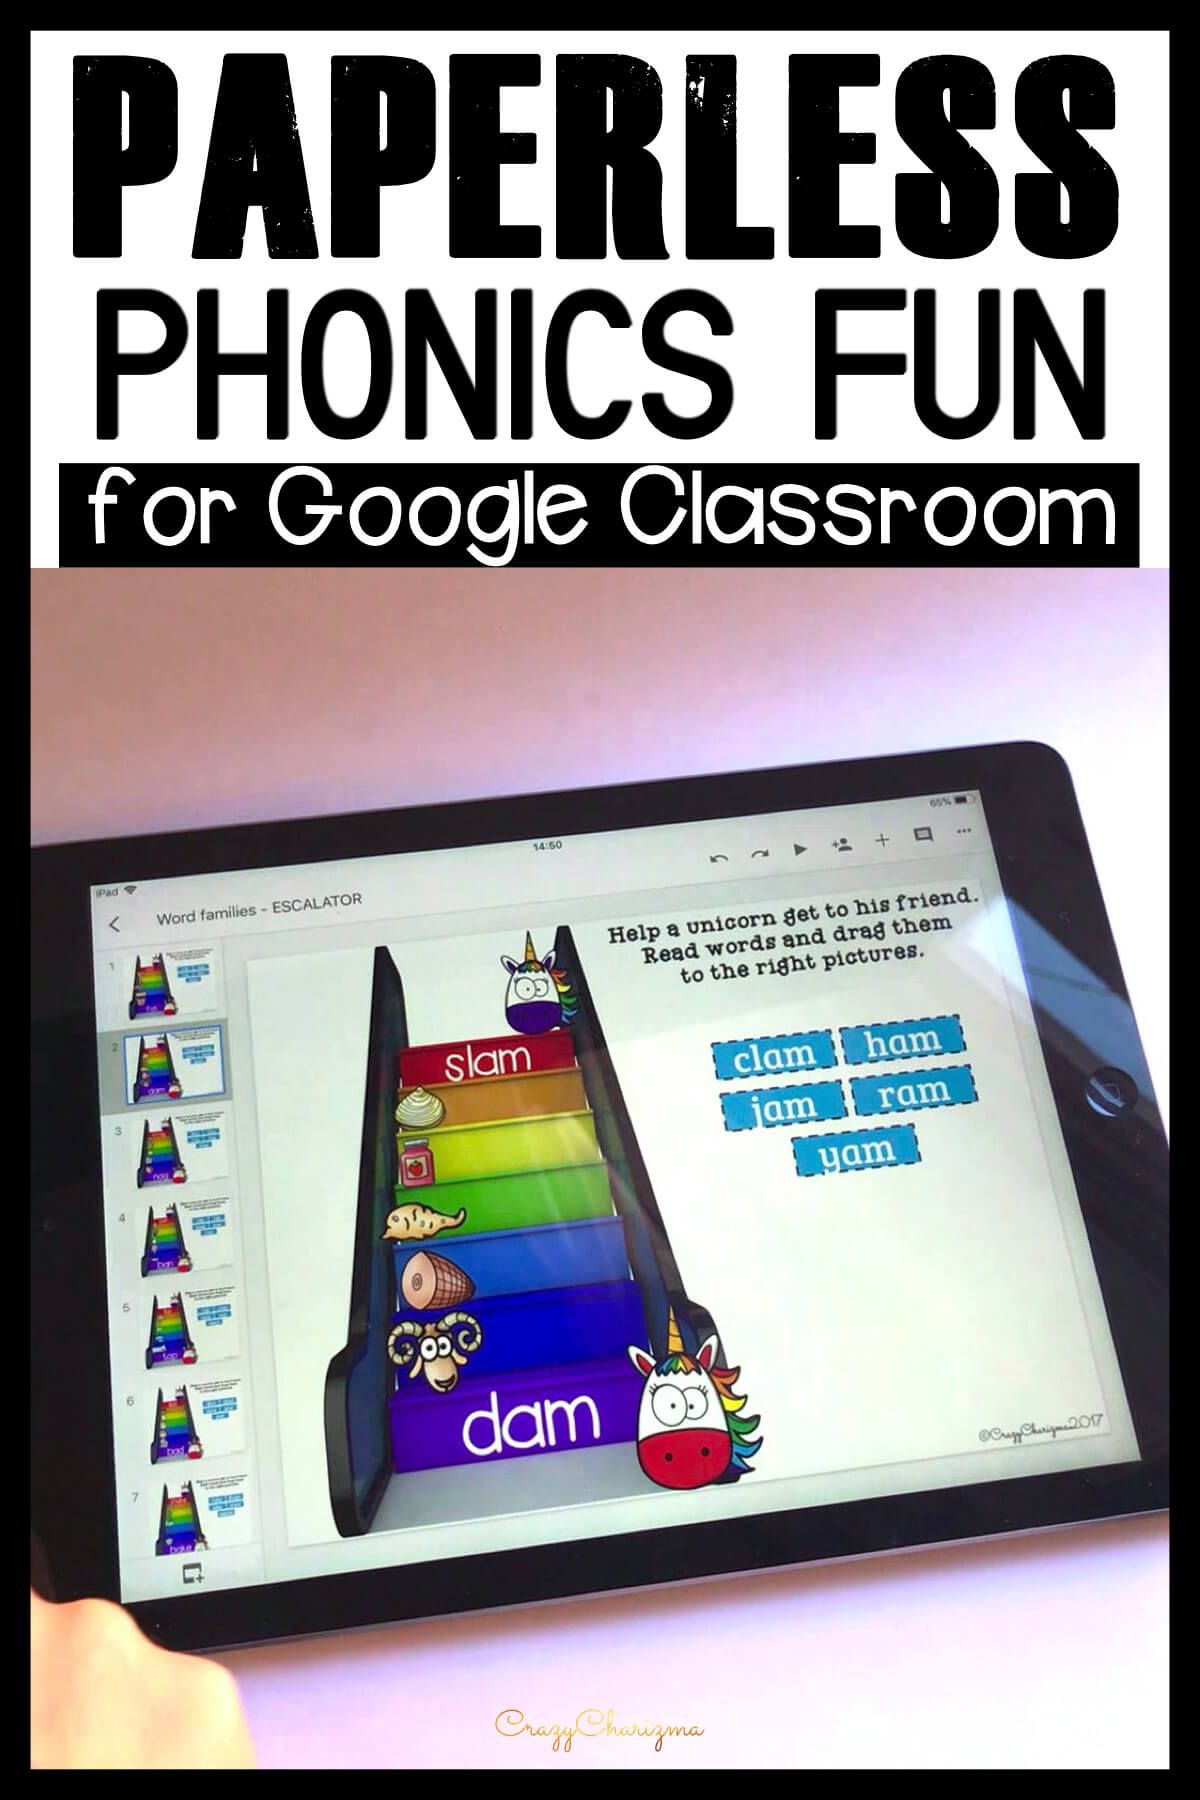 Google Classroom Activities for Kindergarten: Looking for Word Work activities? Need to practice sight words, word families and phonics? Use these reading activities for Google Classroom™. Perfect for guided reading groups, literacy centers and 1:1 work.